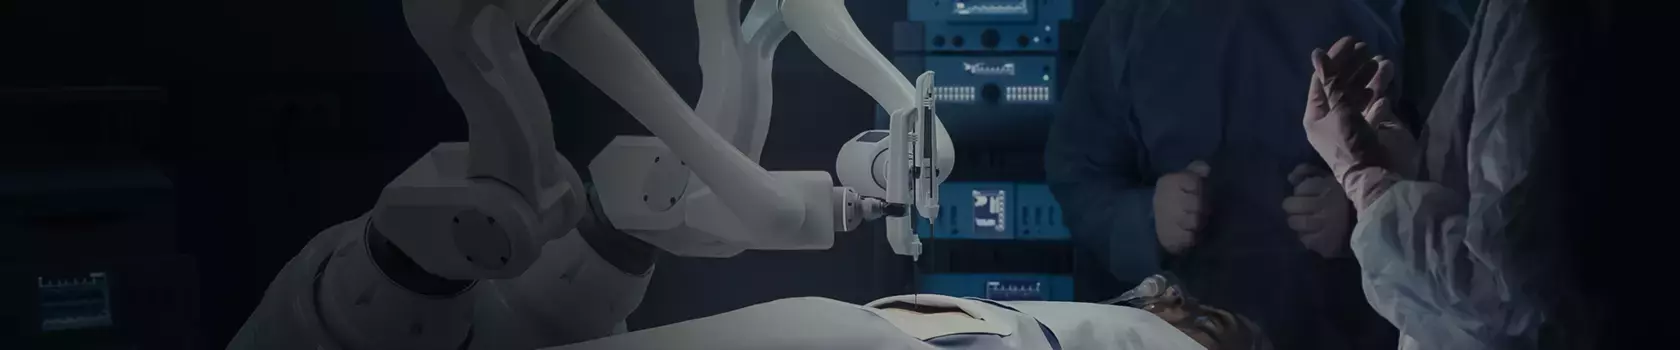 Surgical robots in operating room with doctors